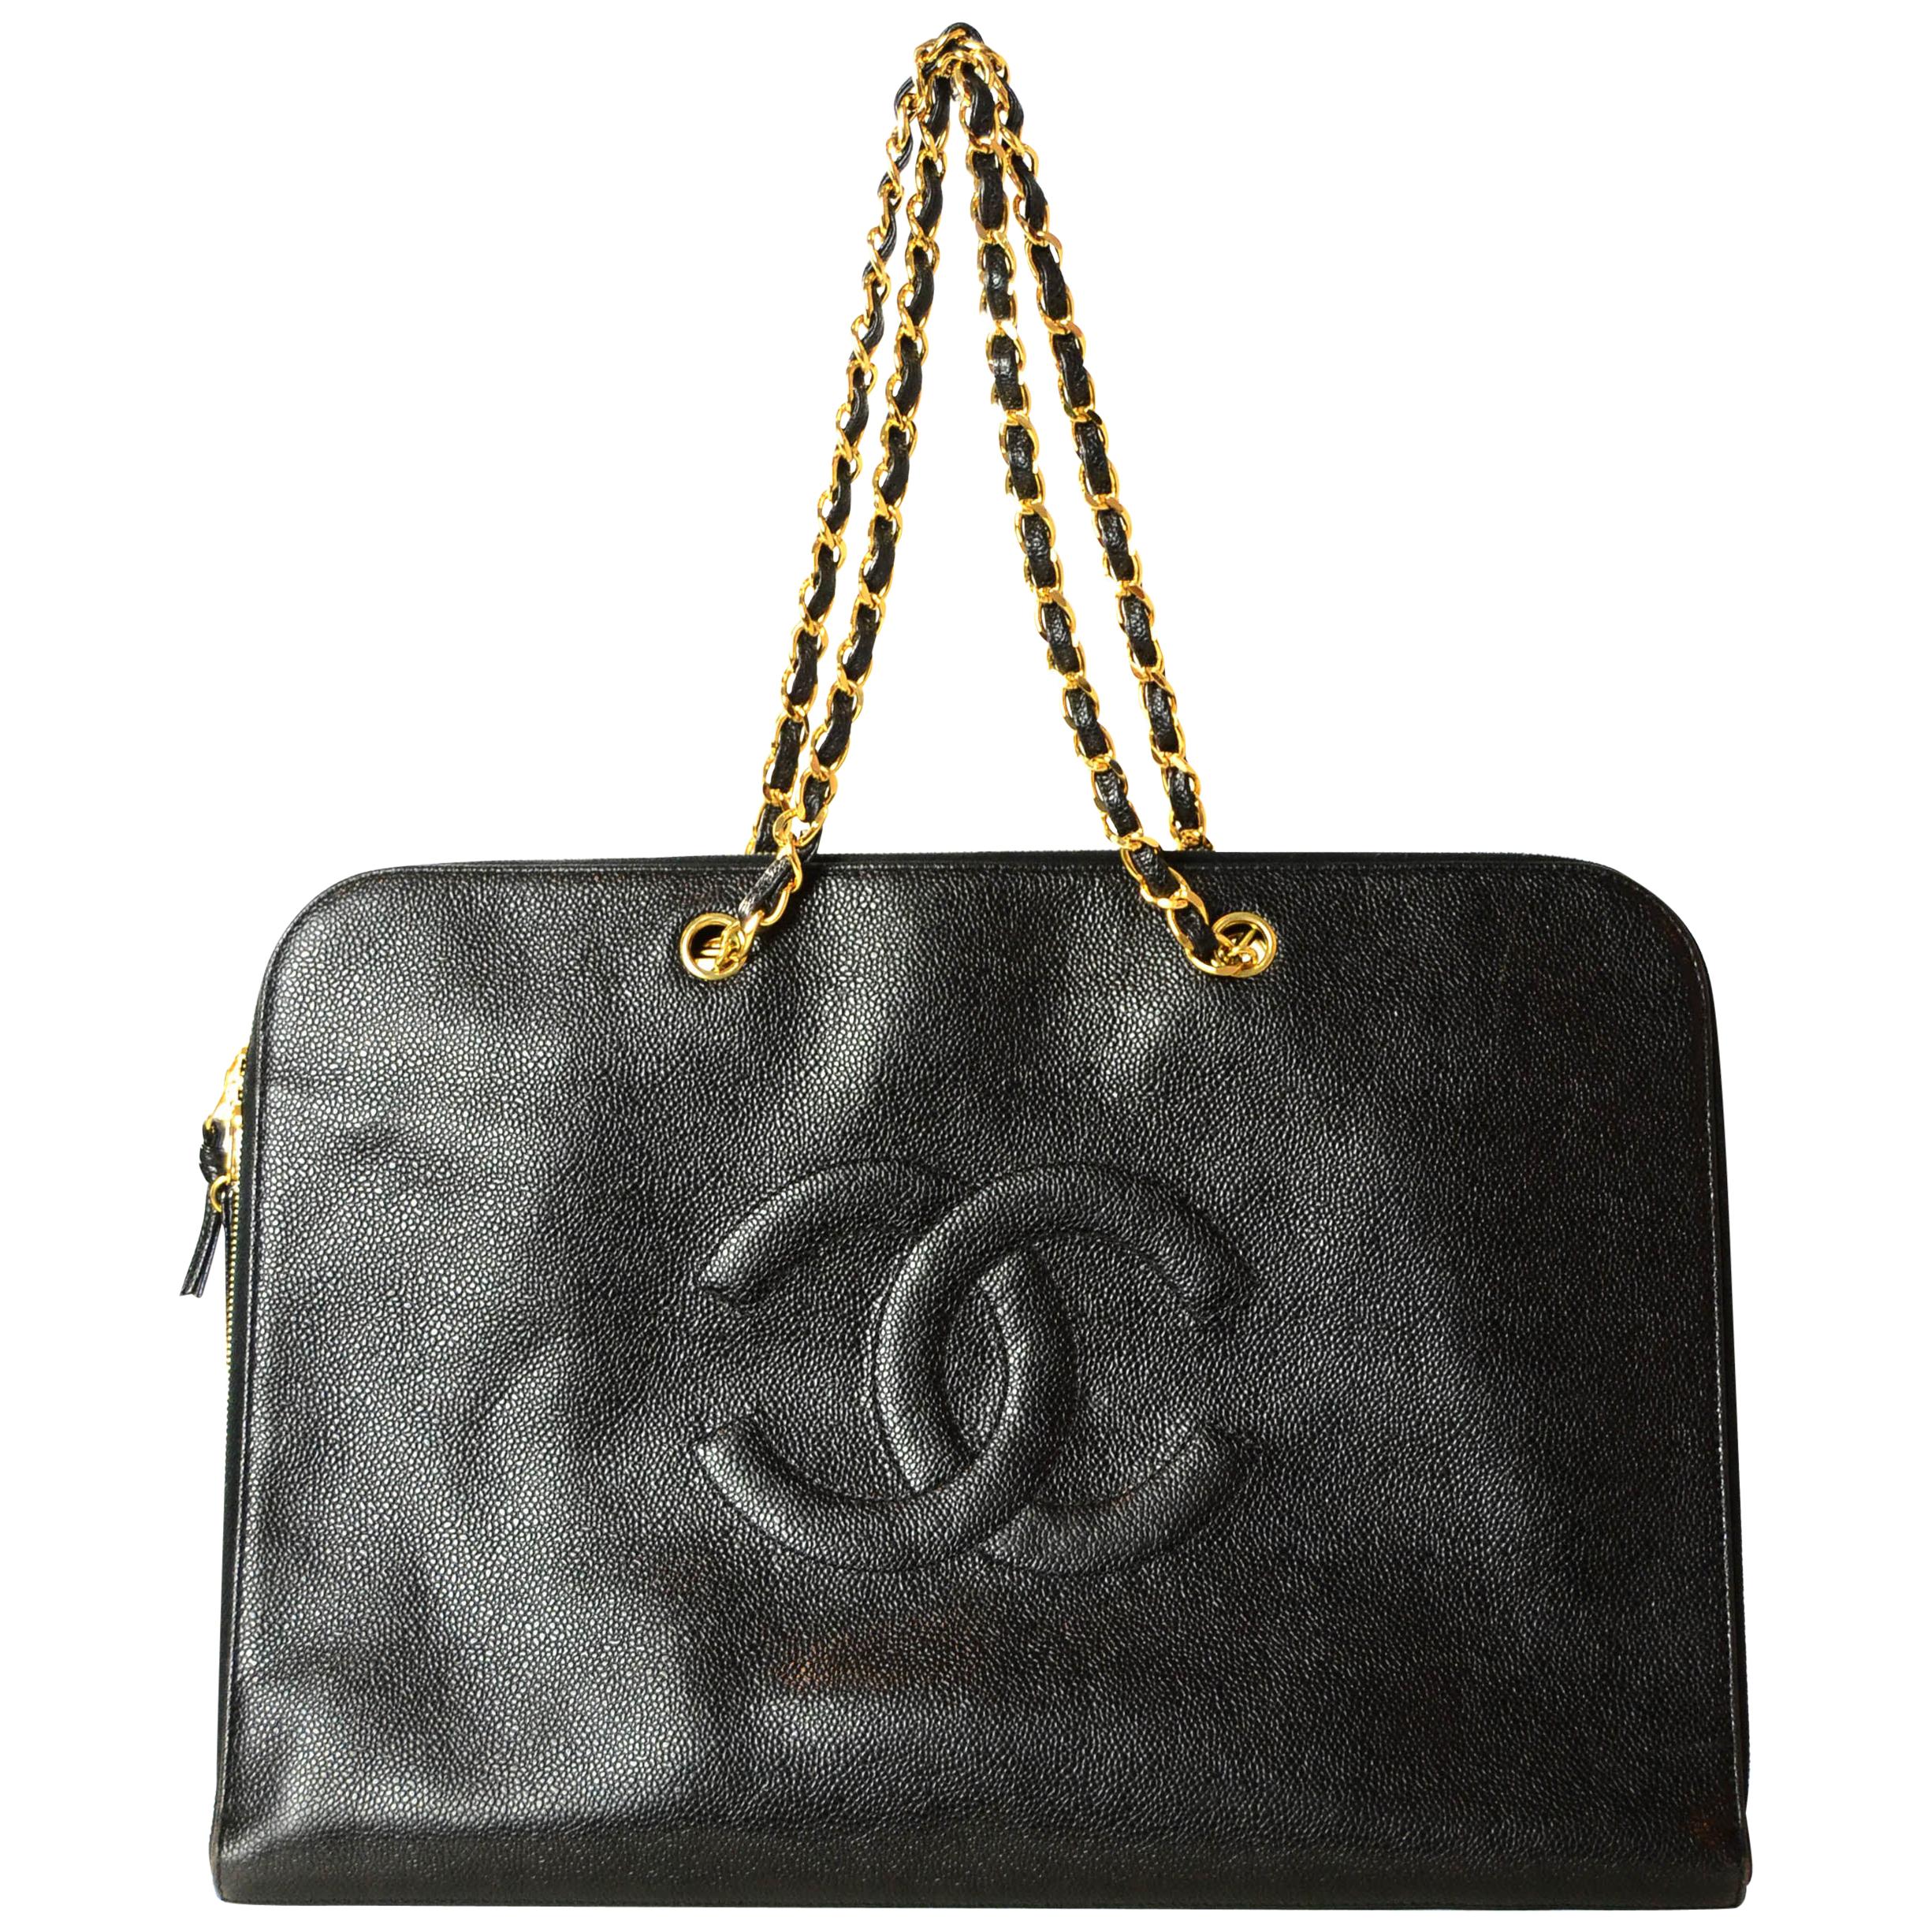 CHANEL CHANEL Coco handle 2way Shoulder Bag A92990 Caviar leather Gray Used  Women GHW A92990